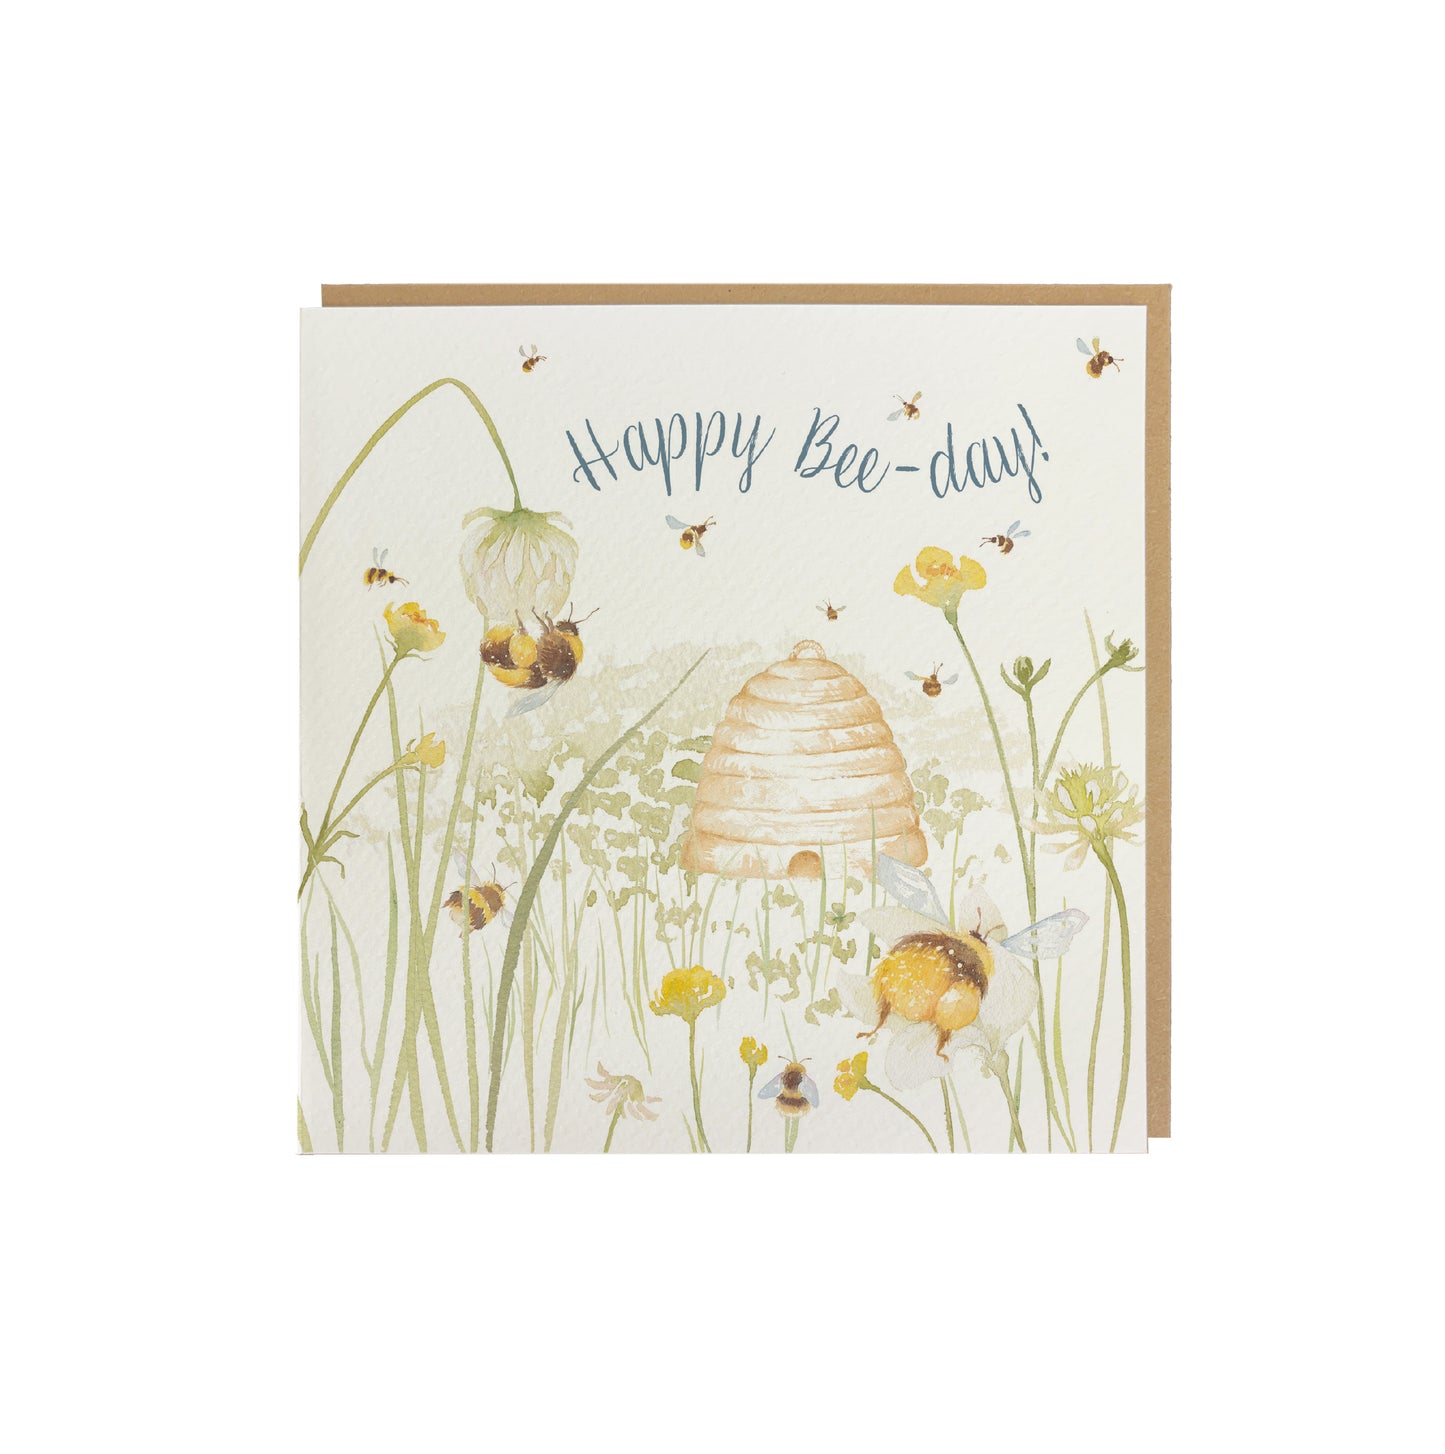 A greetings card reading Happy Bee-day in dark blue text above a buttercup meadow full of bees around a traditional bee hive in a watercolour style. The card has a recyclable brown kraft envelope behind it.